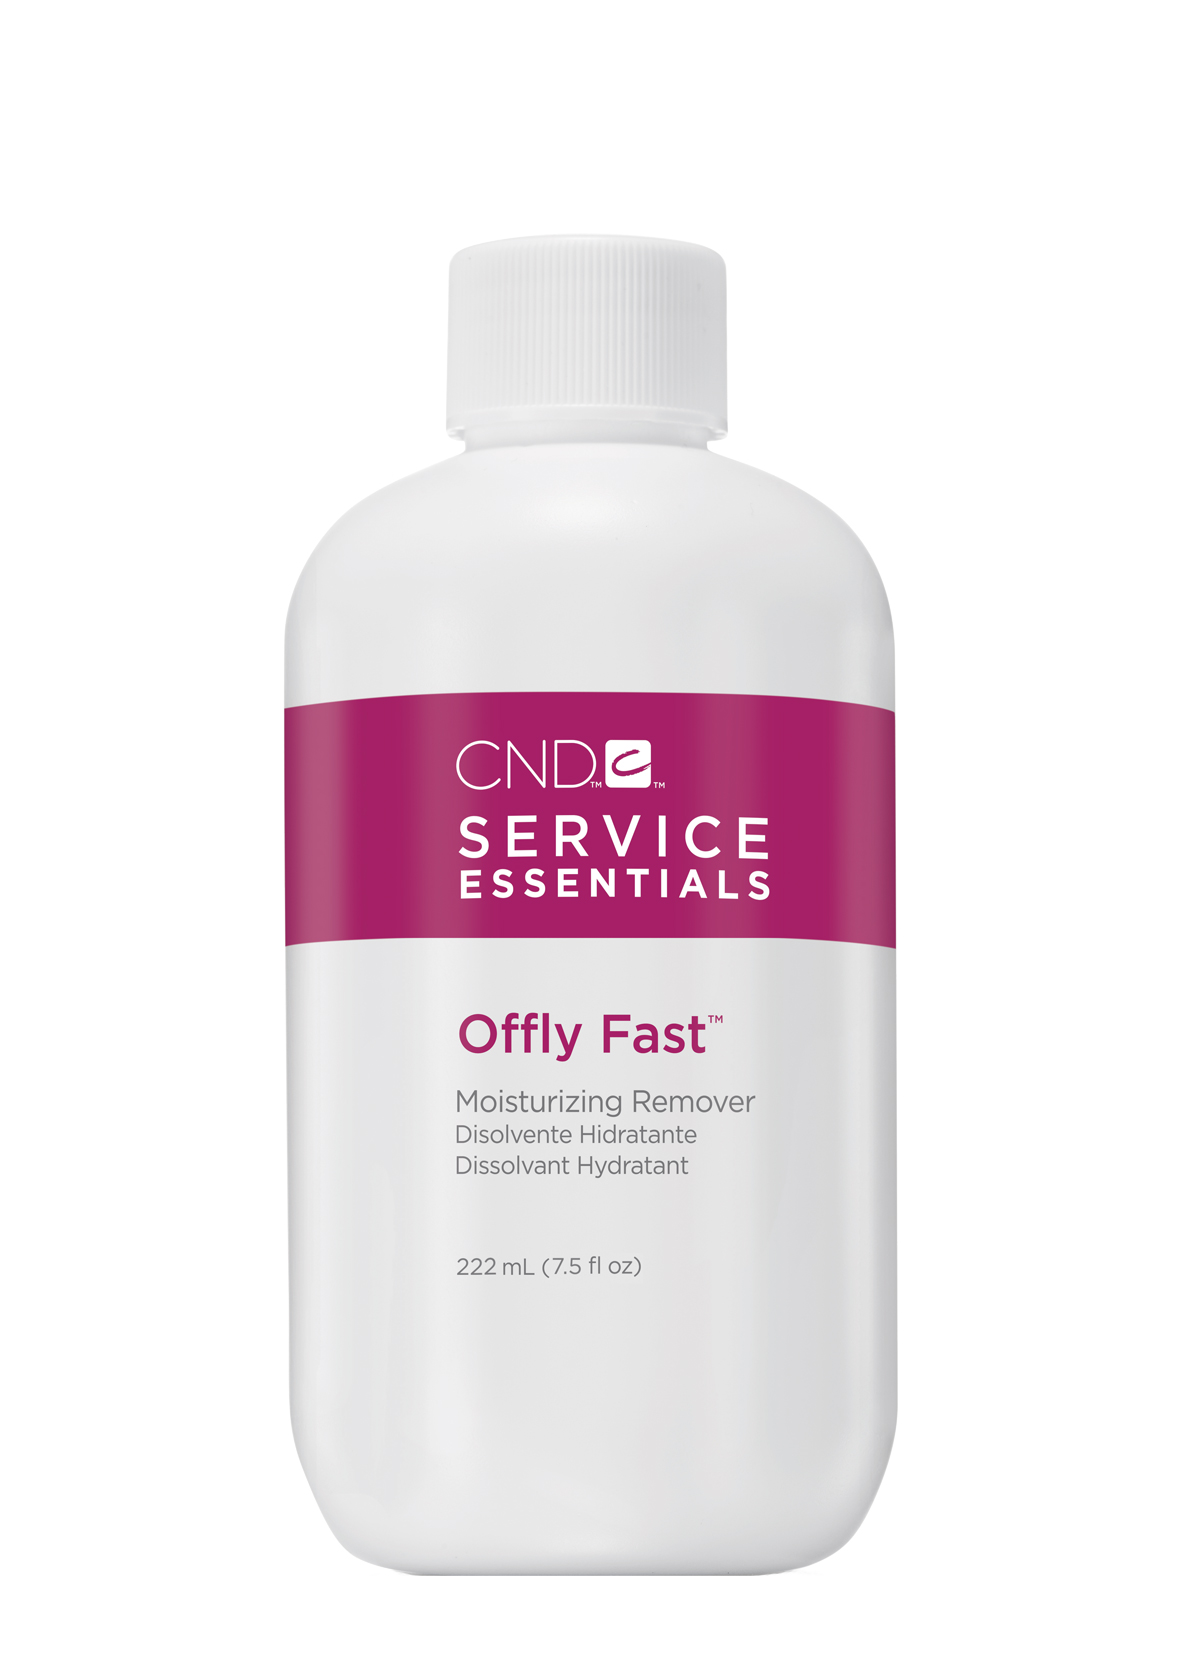  Offly Fast Moisturizing Remover